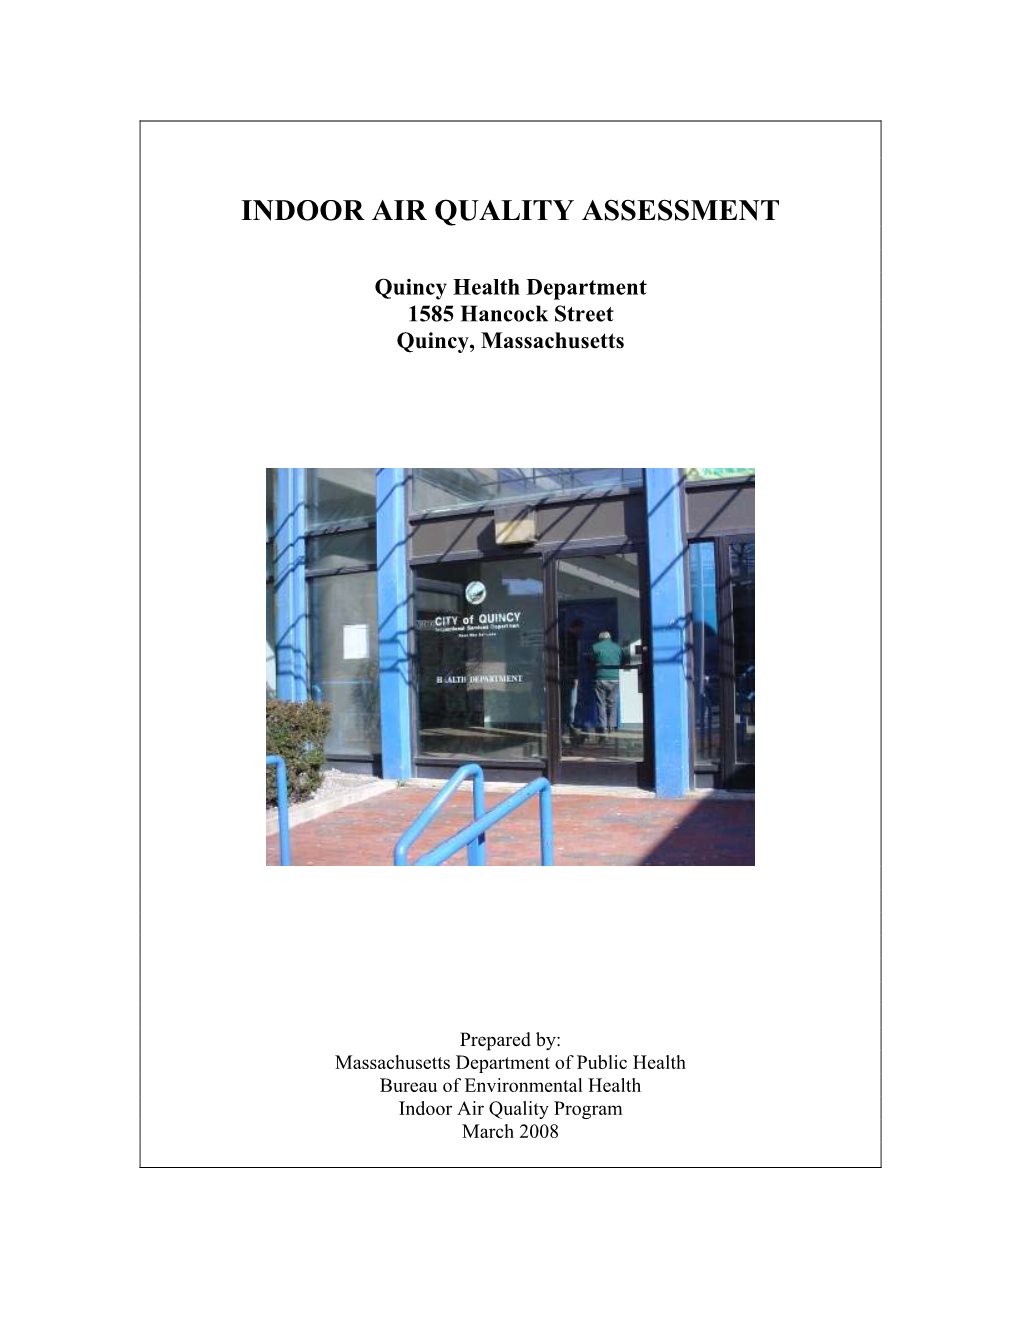 Indoor Air Quality Assessment